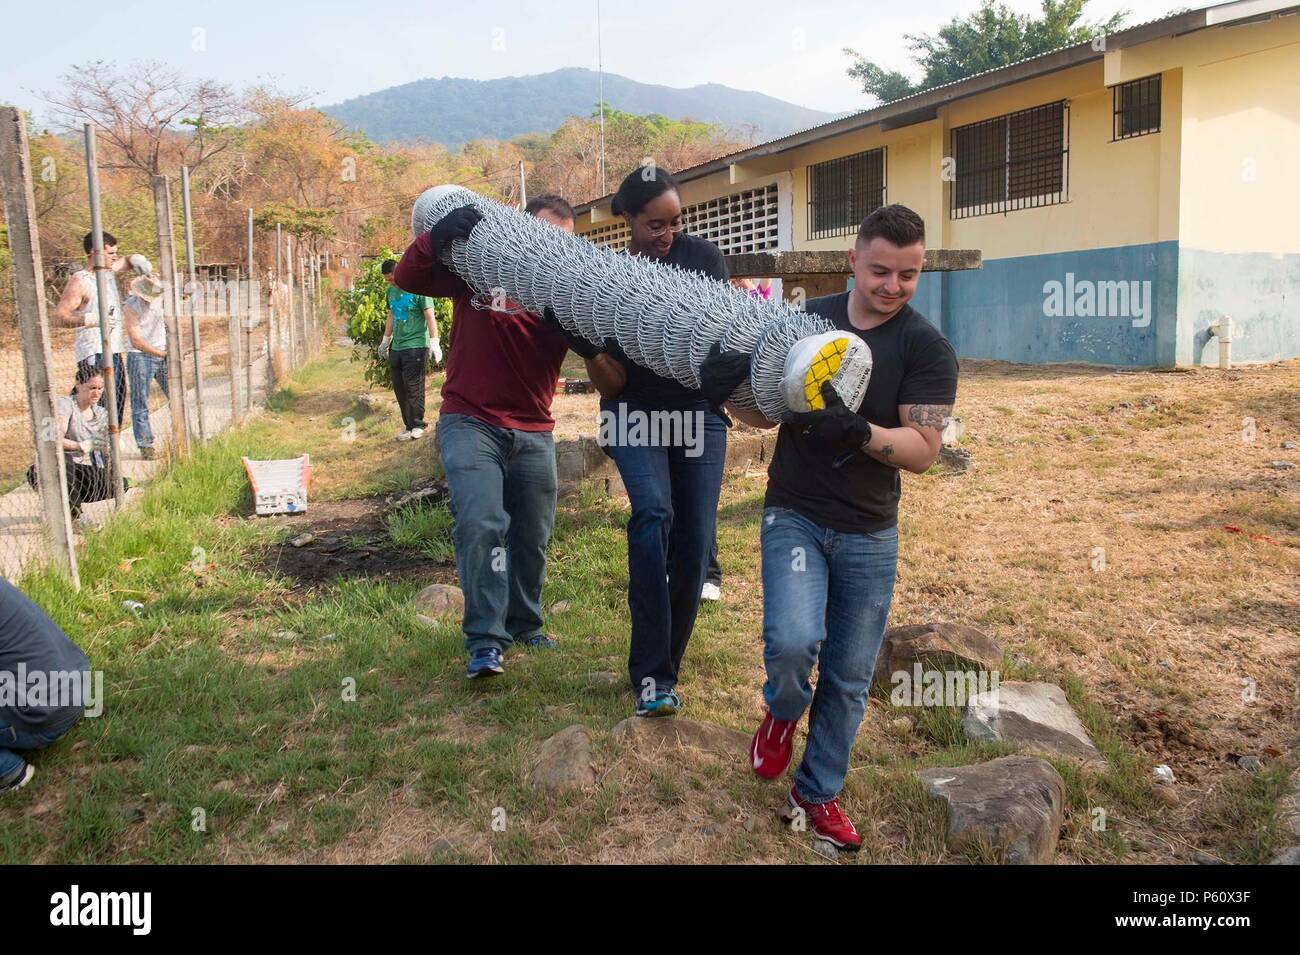 160402-N-MD297-007 VERACRUZ, Panama (April 2, 2016) Sailors from the Arleigh Burke-class guided-missile destroyer USS Lassen (DDG 82) carry fencing to replace a damaged fence at the Cosecha de Amistad School in Veracruz, Panama during a community service event with members of PanamaÕs Presidential Protective Service (SPI). Lassen is currently underway in support of Operation Martillo, a joint operation with the U.S. Coast Guard and partner nations within the 4th Fleet area of responsibility. Operation Martillo is being led by Joint Interagency Task Force South, in support of U.S. Southern Comm Stock Photo